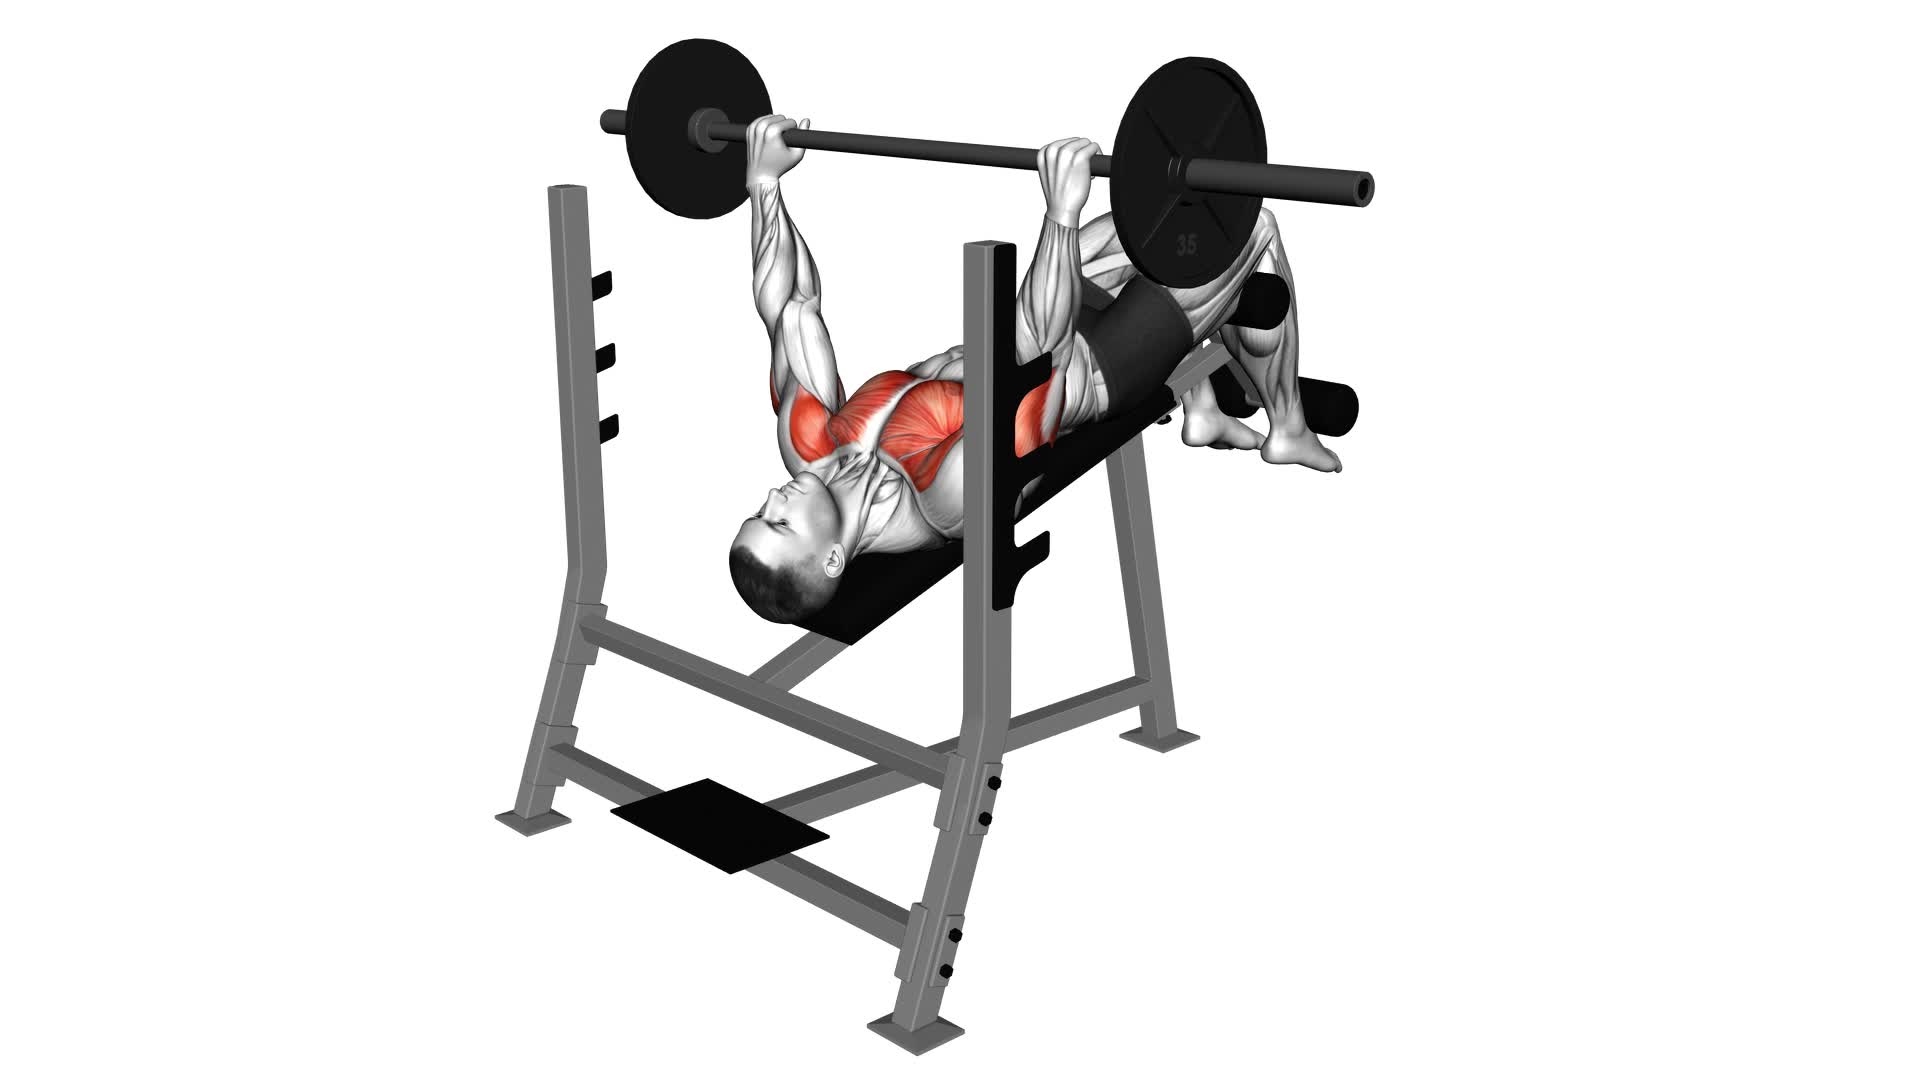 Barbell Decline Bench Press - Video Exercise Guide & Tips